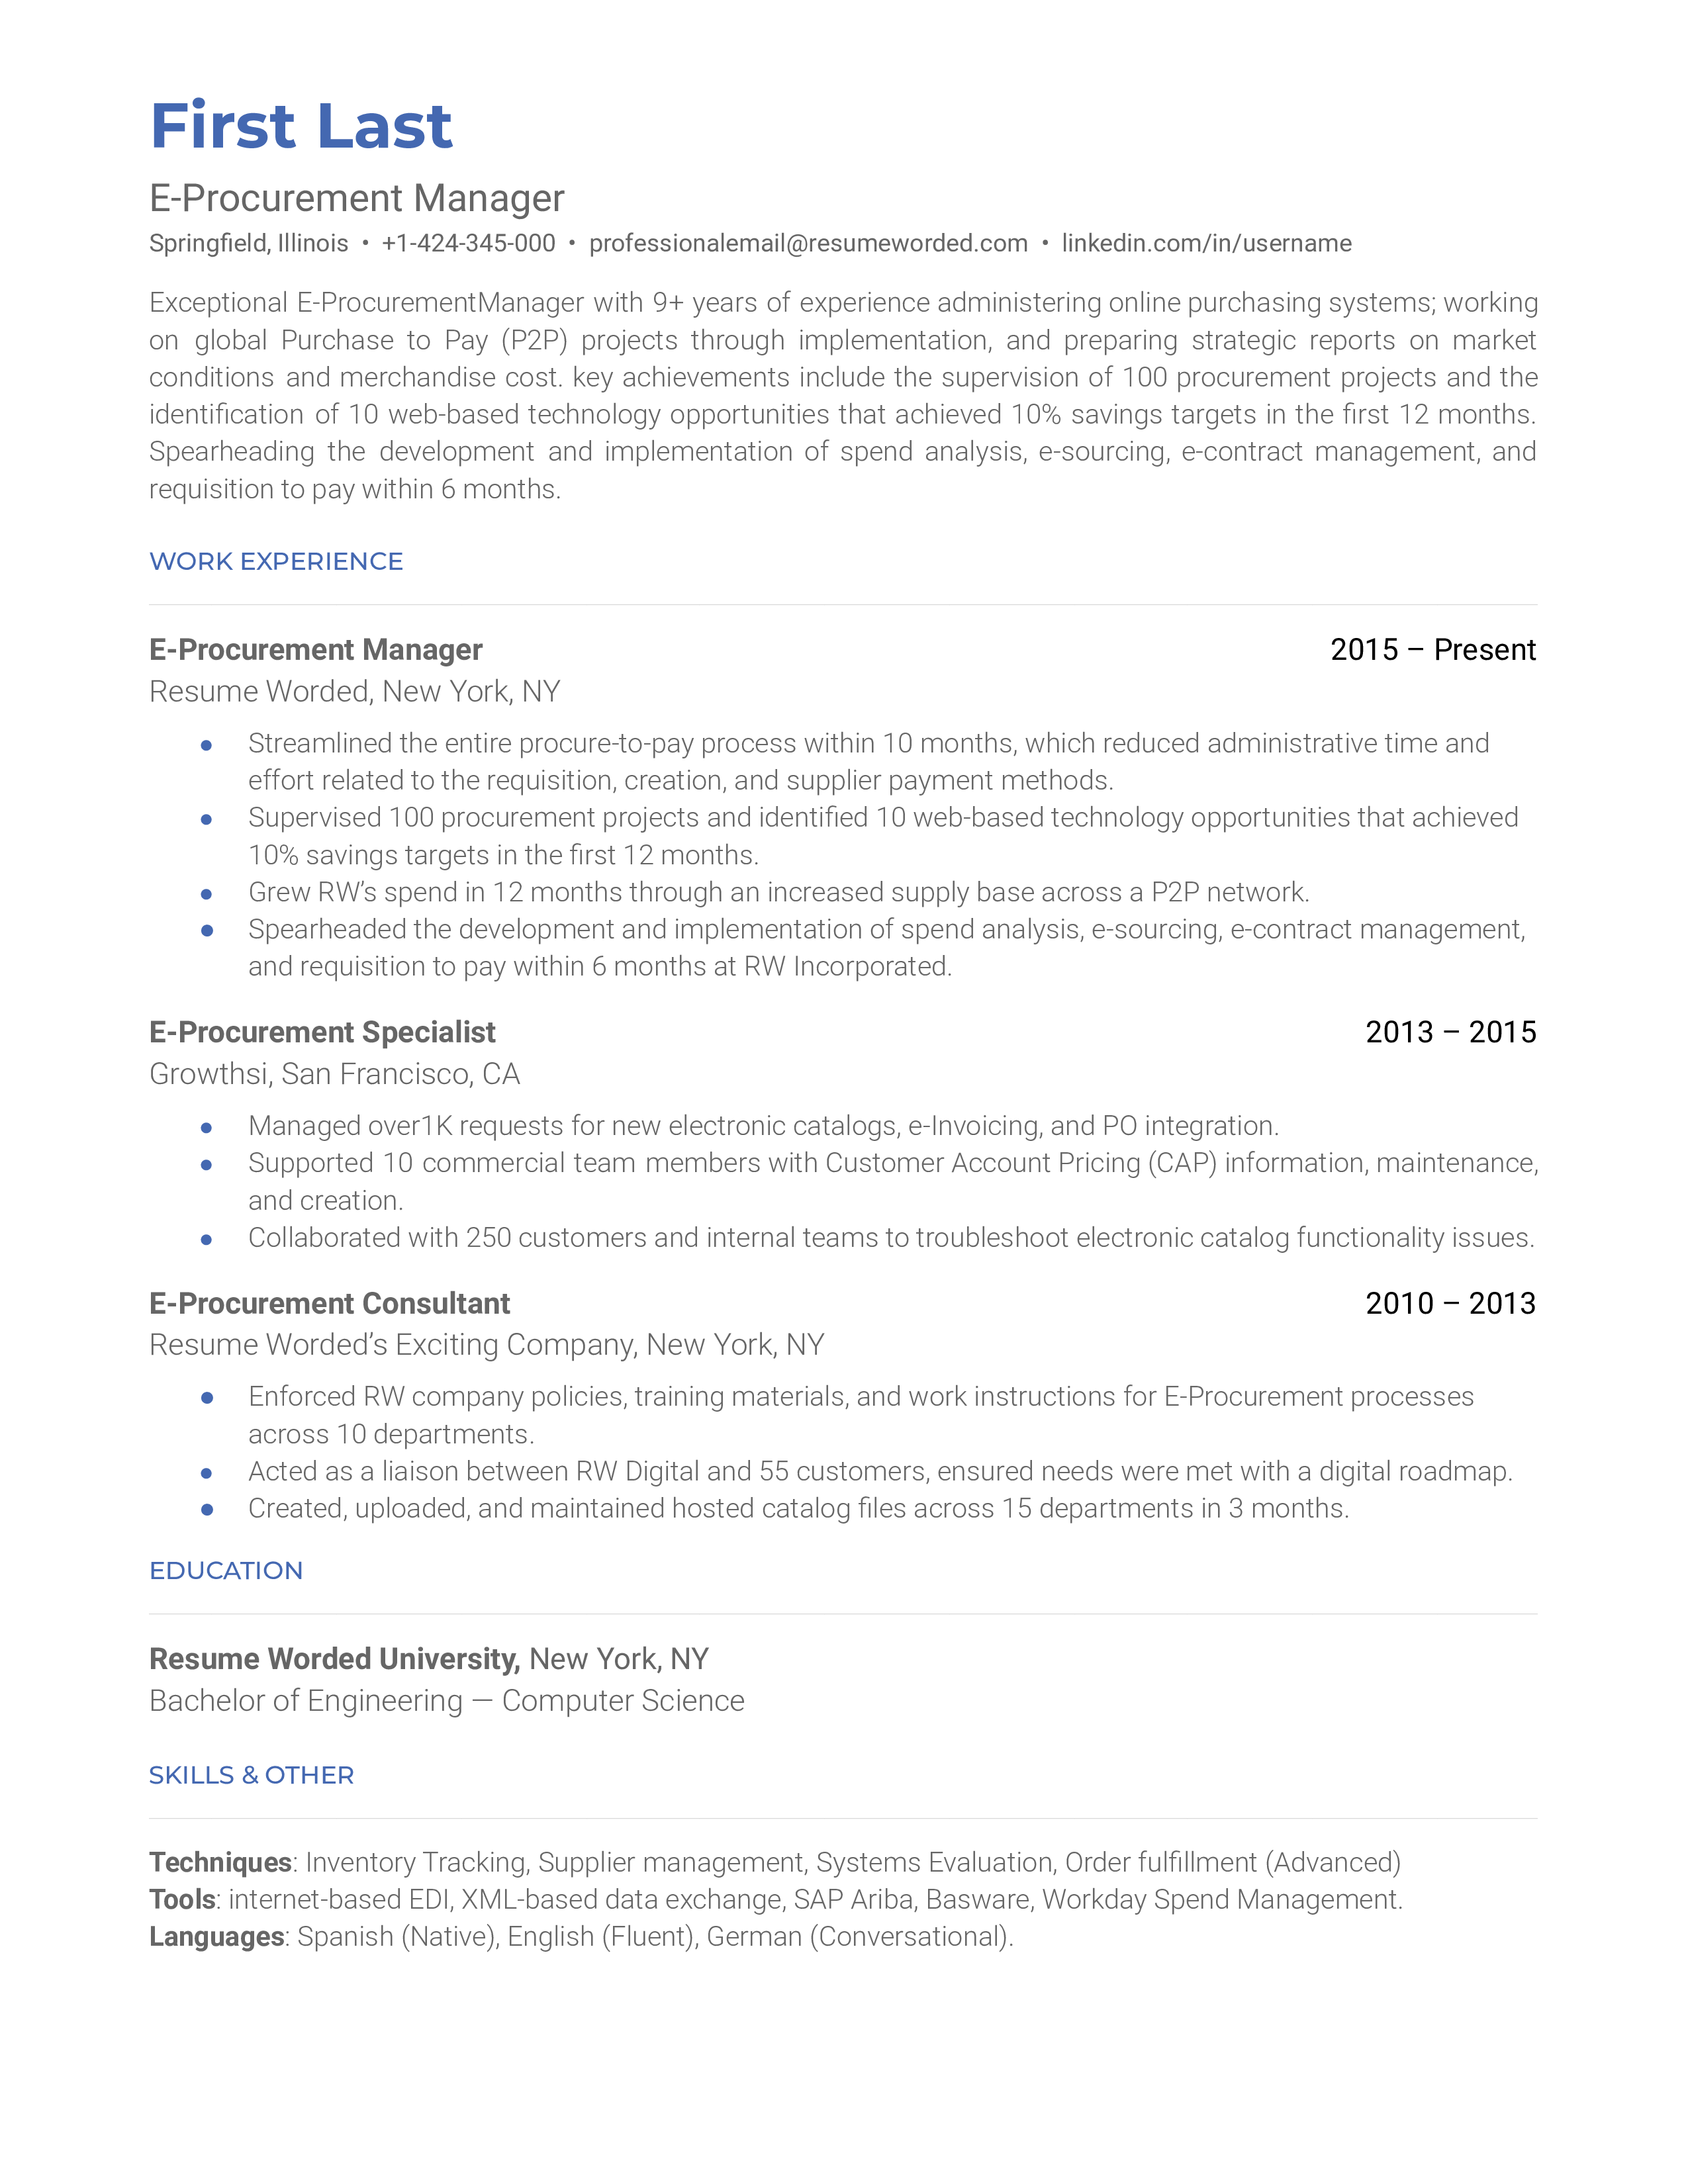 E-procurement manager sample resume that shows IT experience and managerial skills